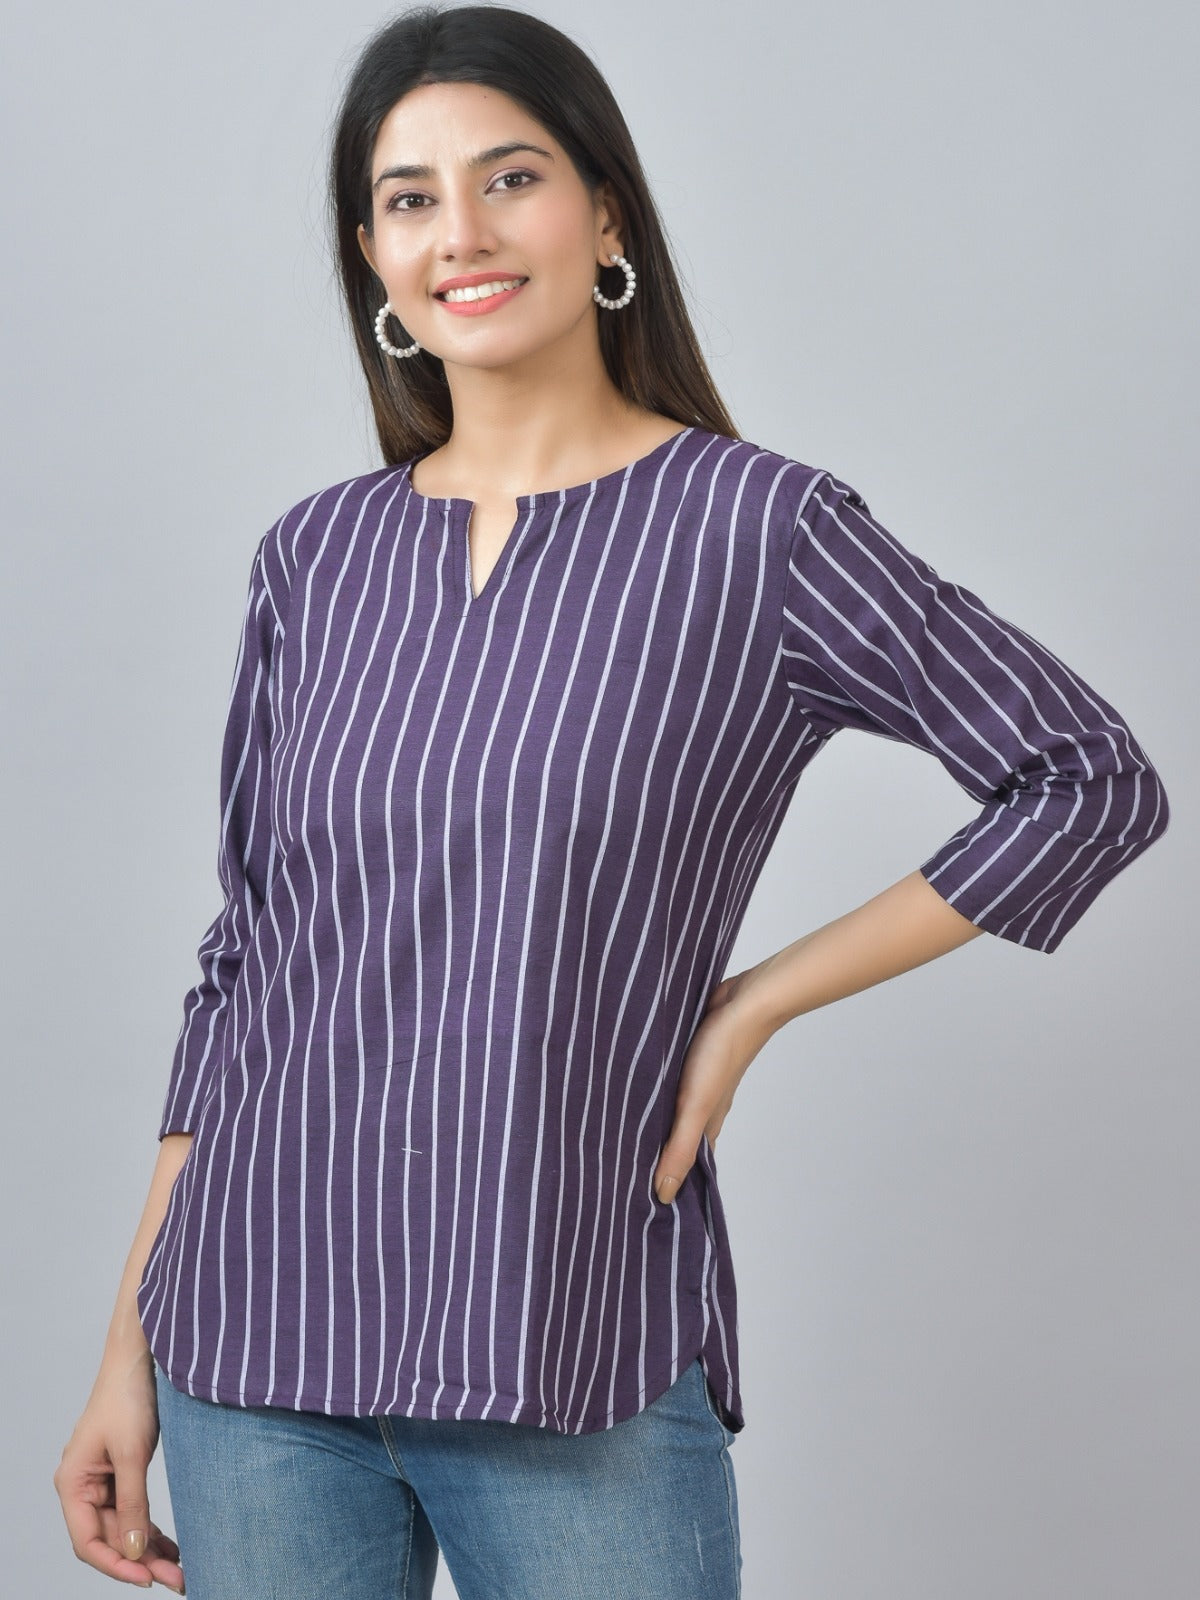 Pack Of 2 Orange And Dark Purple Striped Cotton Womens Top Combo